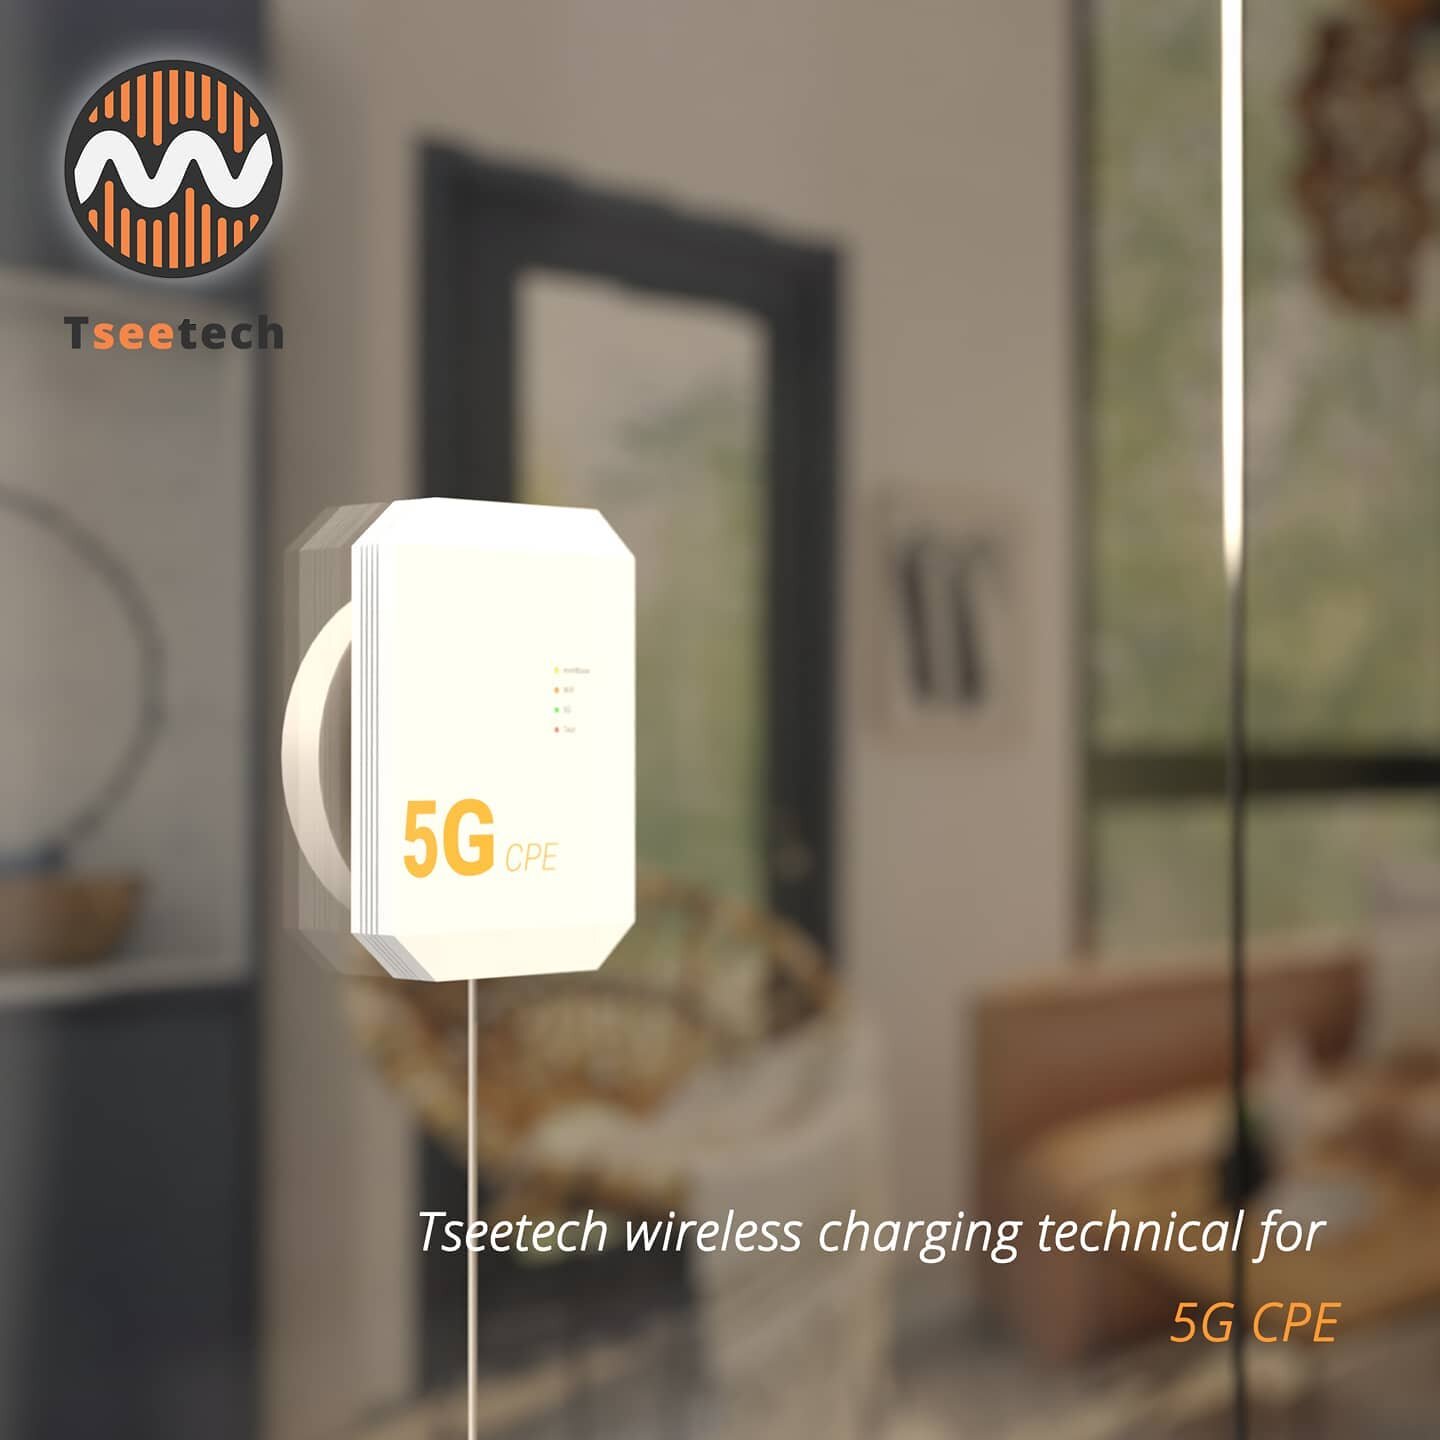 The 5G CPE wireless charger would power through the glasswindows with the groundbreaking max 50mm thickness, and &gt;83% amazing effeciency. Enjoy 5G ahead of anyone else.

www.tseetech.com/solutions

#5GCPE
#powerthroughwindows
#5Gwirelesscharger
#t